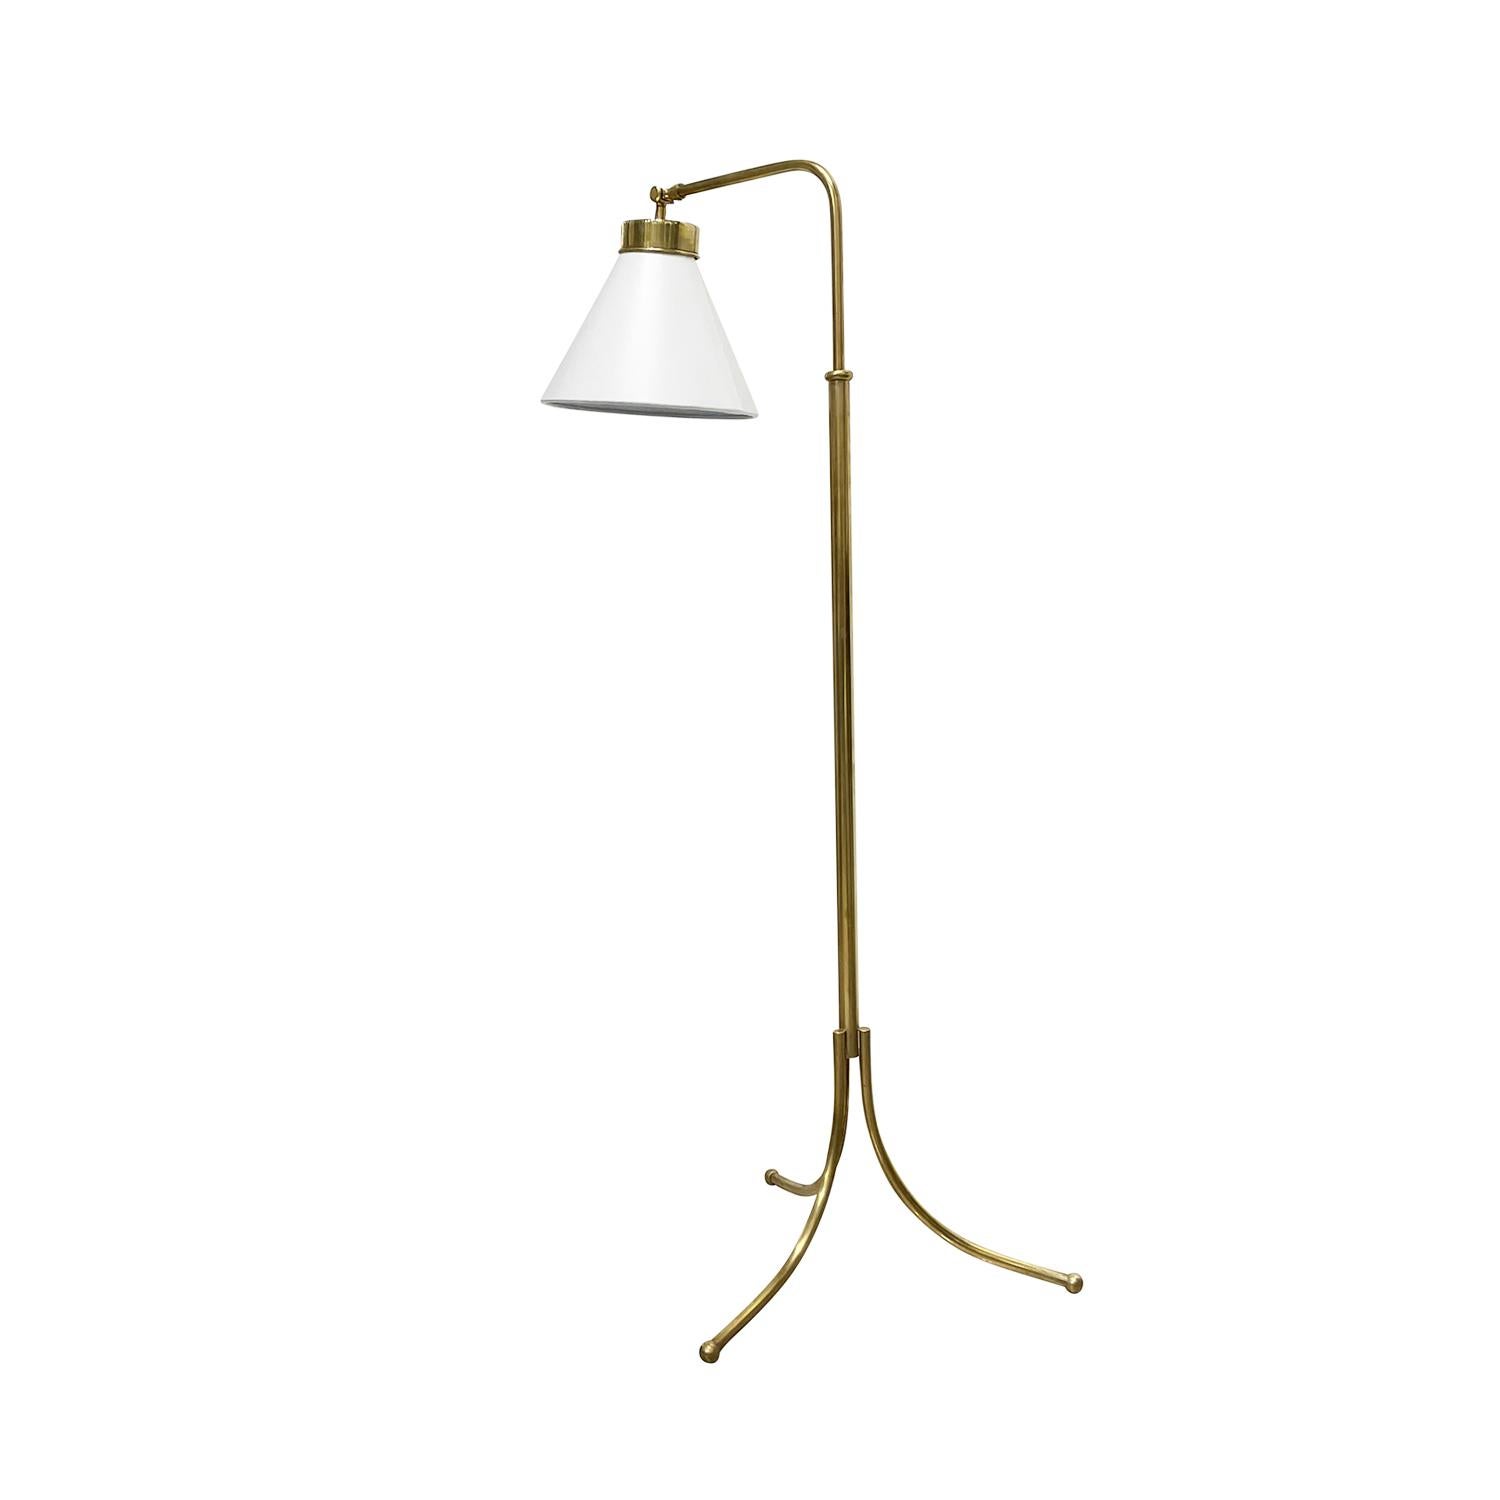 A vintage Mid-Century Modern Swedish floor lamp made of handcrafted polished brass, designed by Josef Frank and produced by Svenskt Tenn in good condition. The height of the Scandinavian light is adjustable, composed with a new white small round